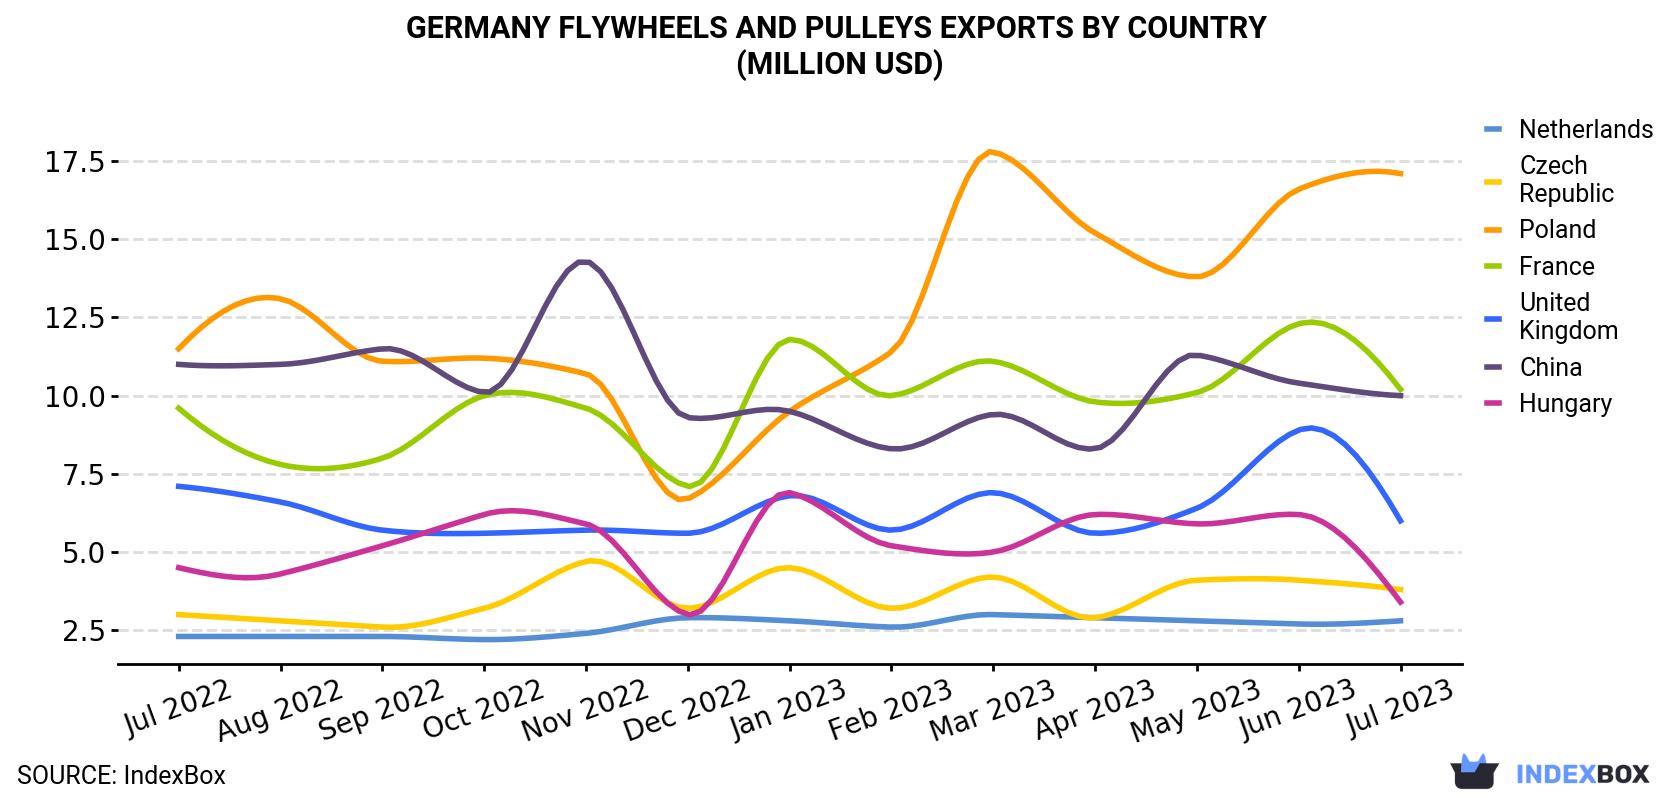 Germany Flywheels And Pulleys Exports By Country (Million USD)